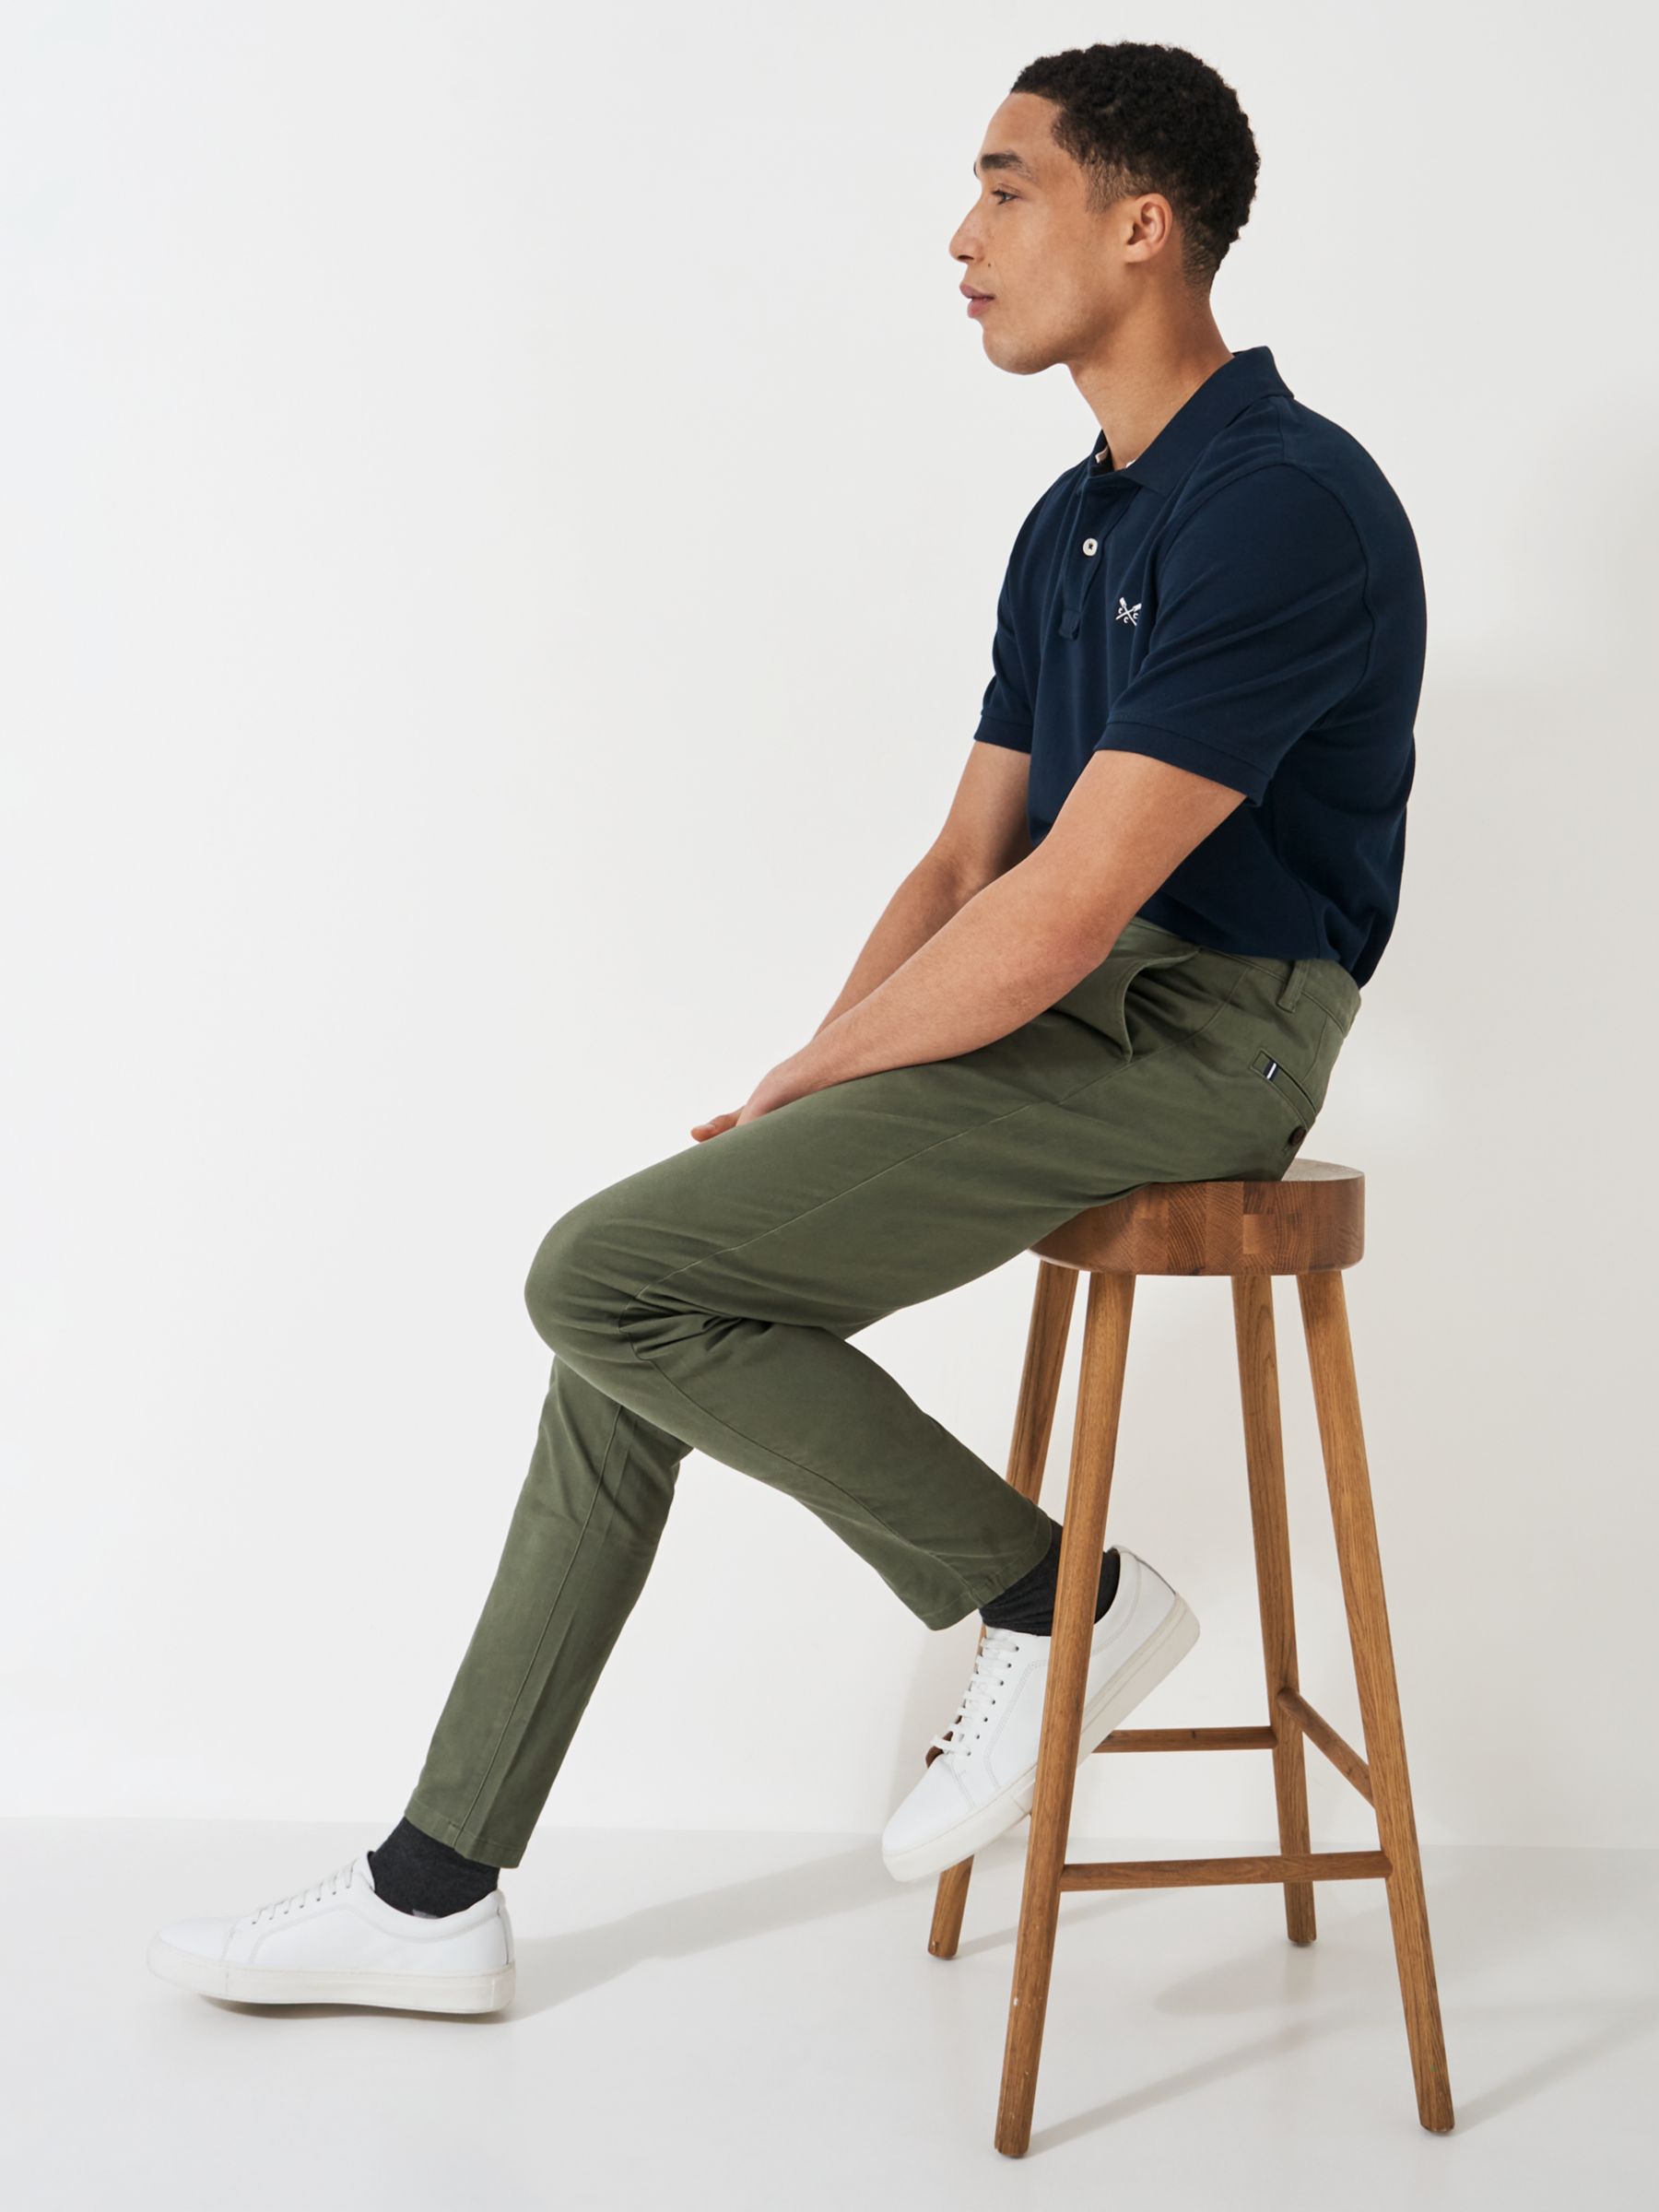 Crew Clothing Slim Fit Chinos, Green, 40L